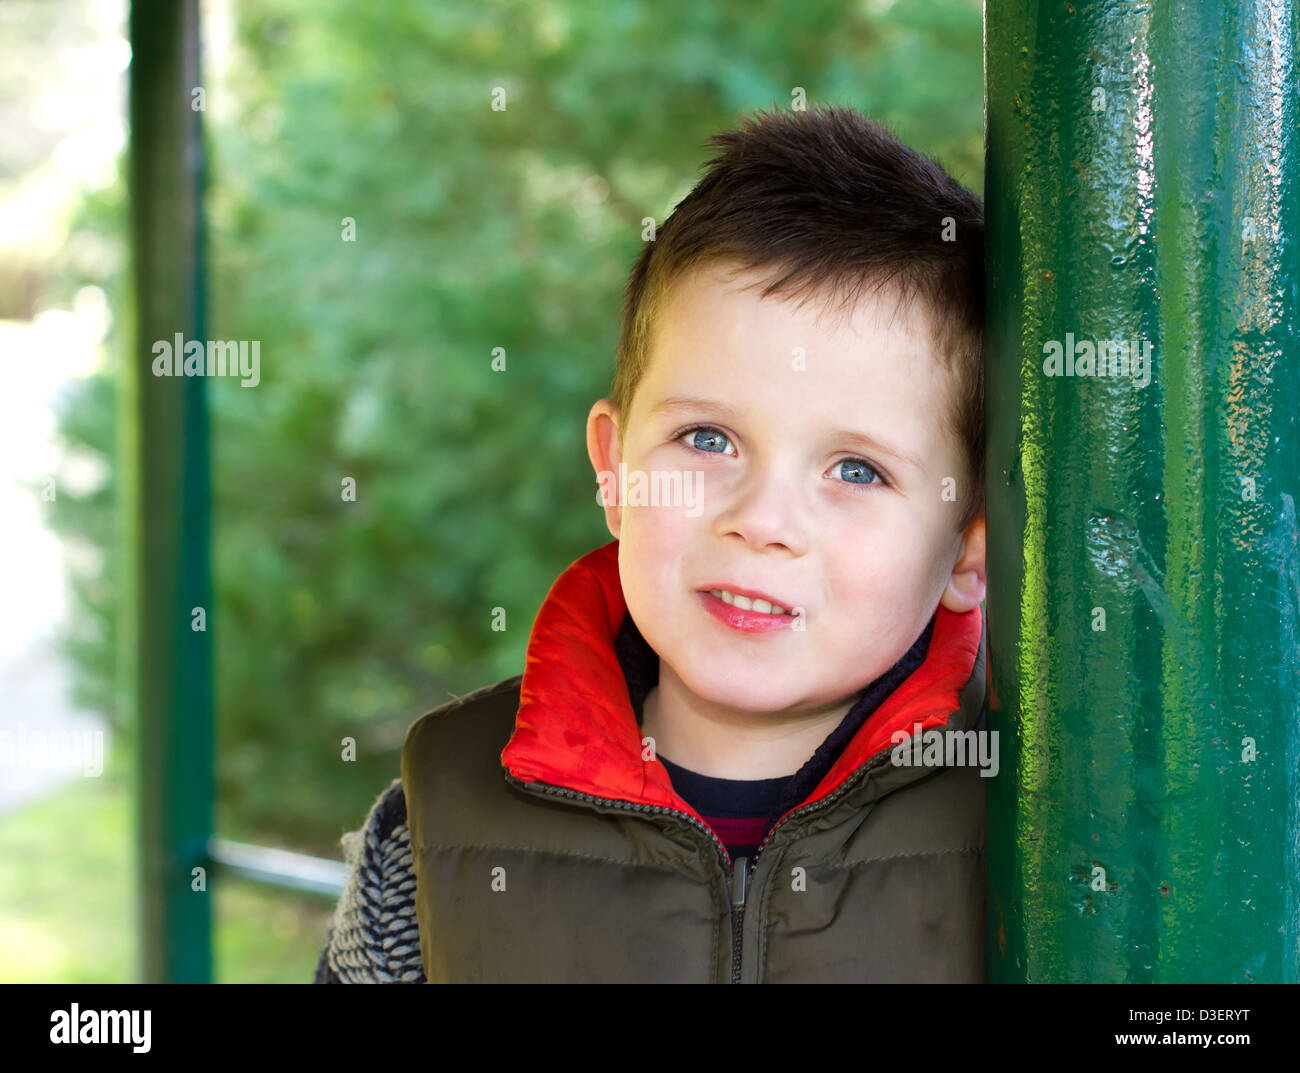 Happy young boy smiling in an outdoor scene Stock Photo